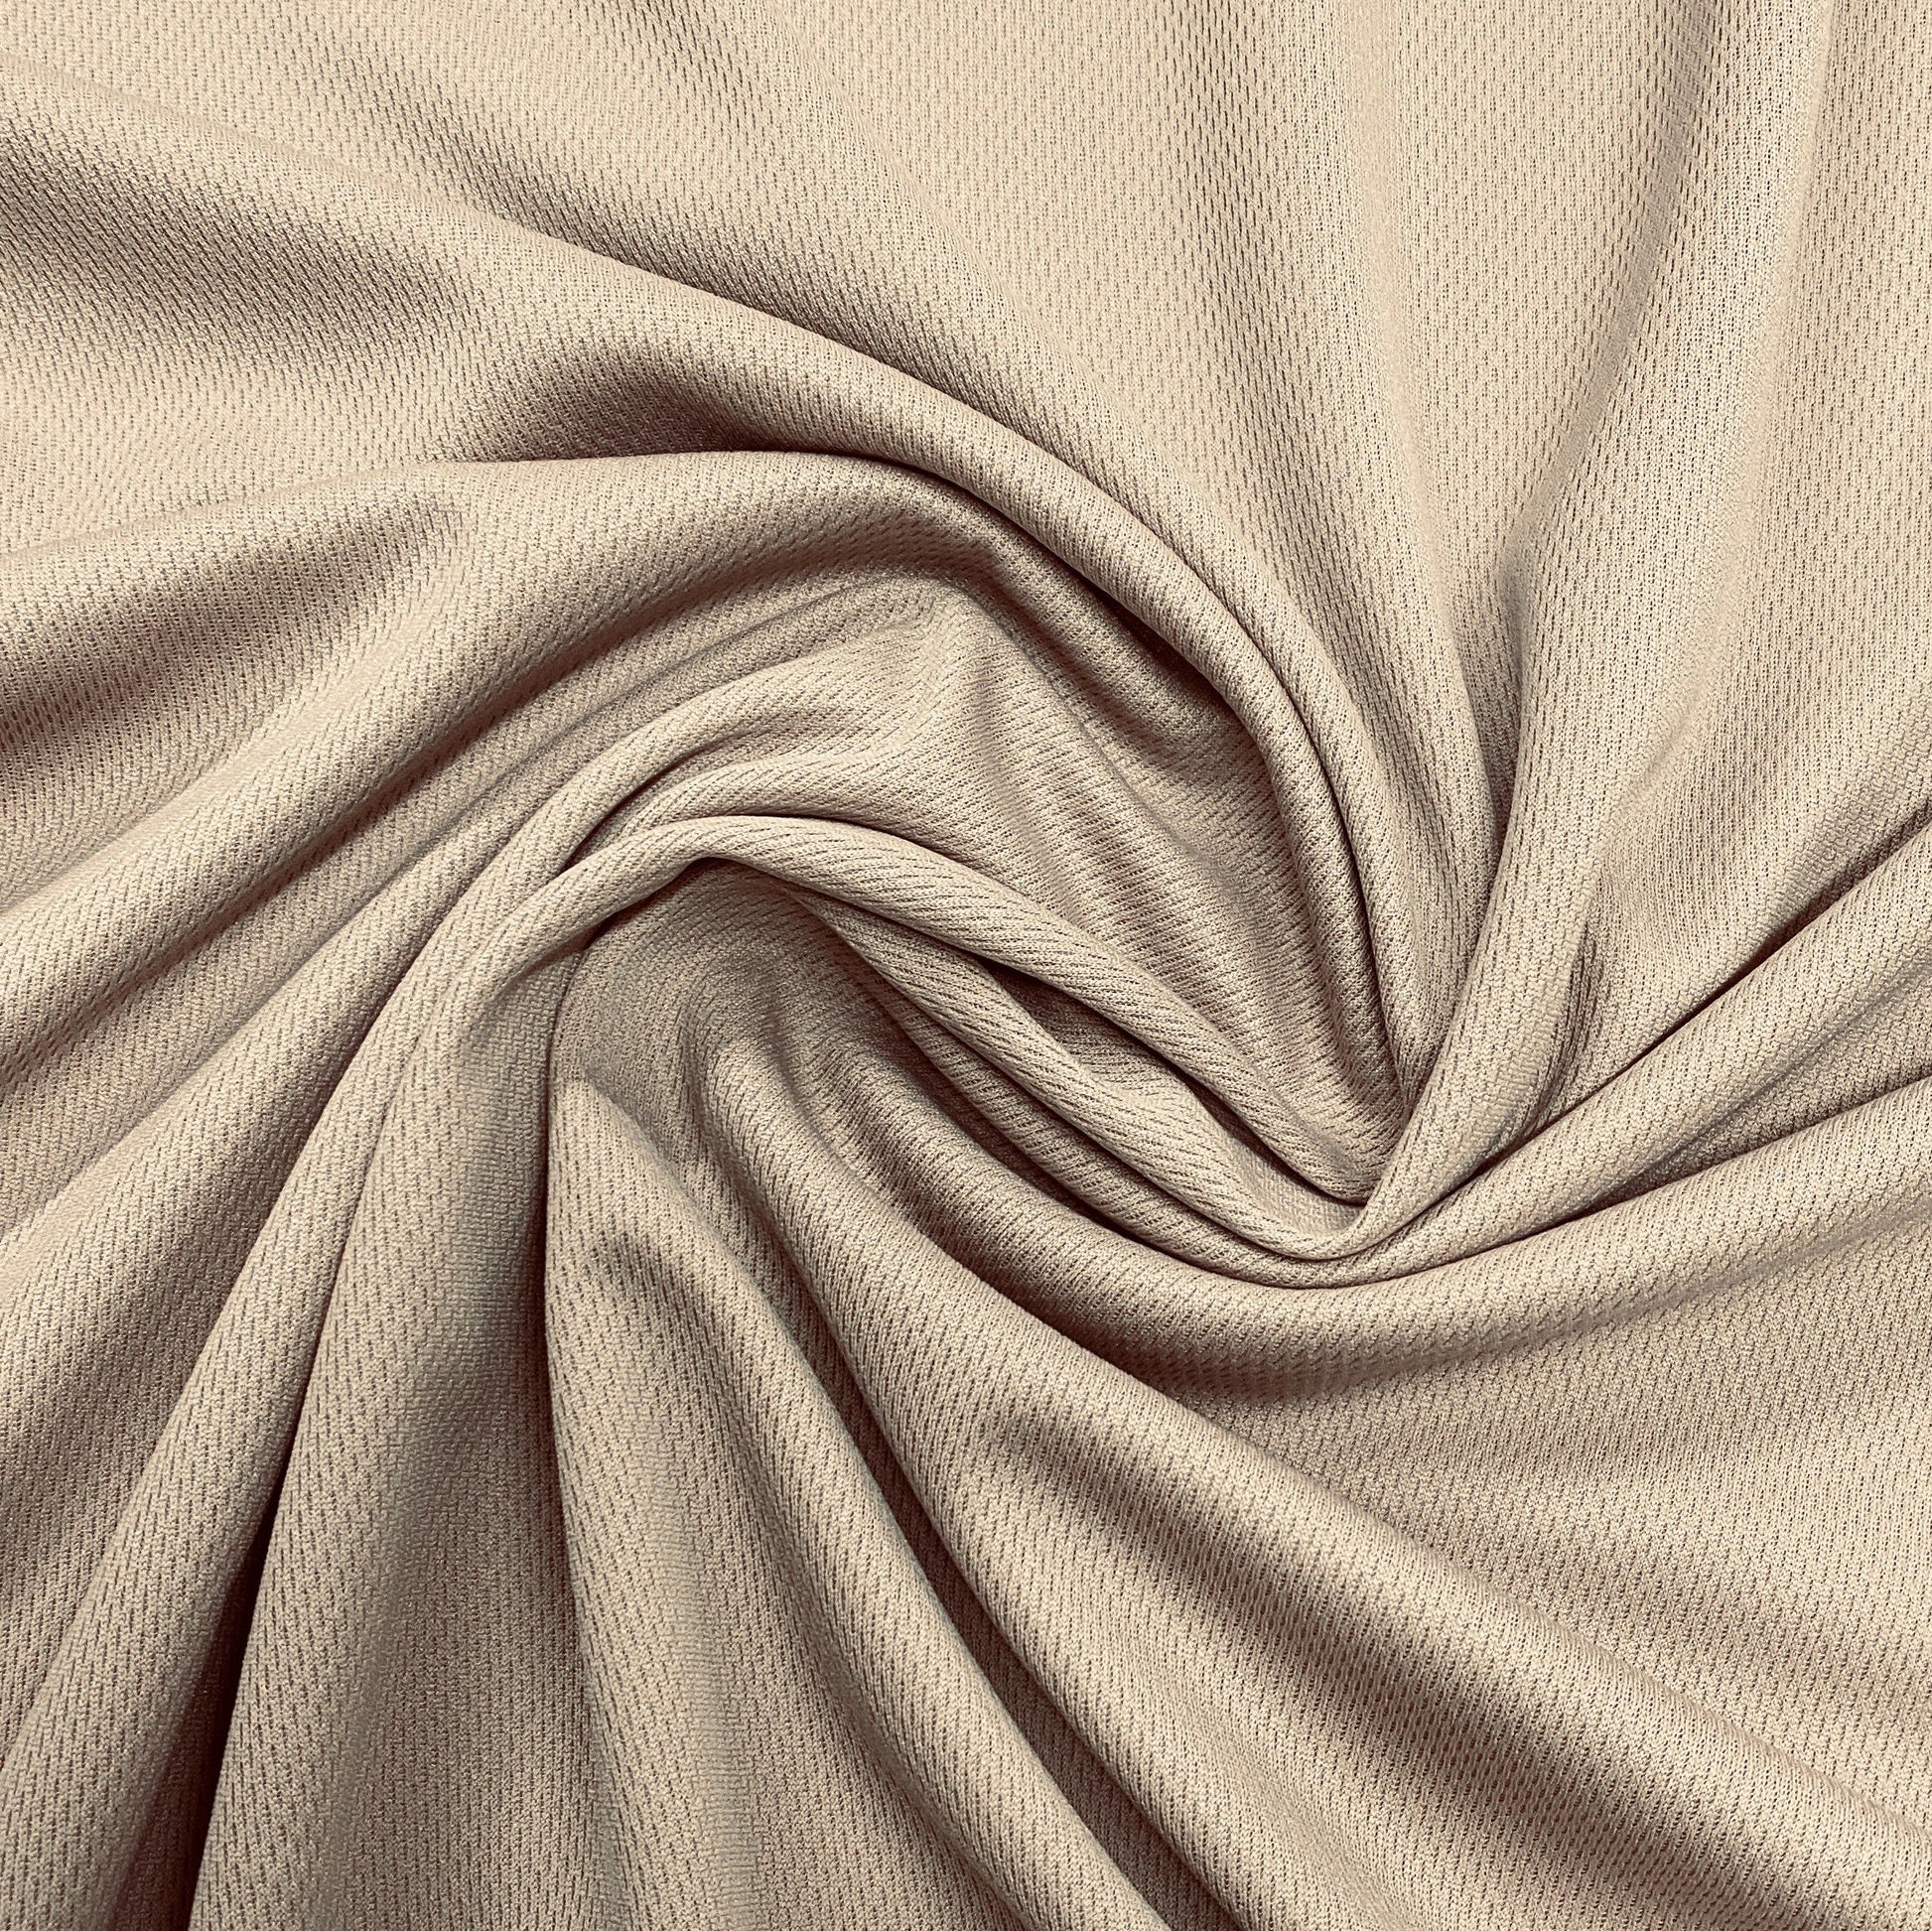 White Polyester Athletic Wicking Jersey Fabric